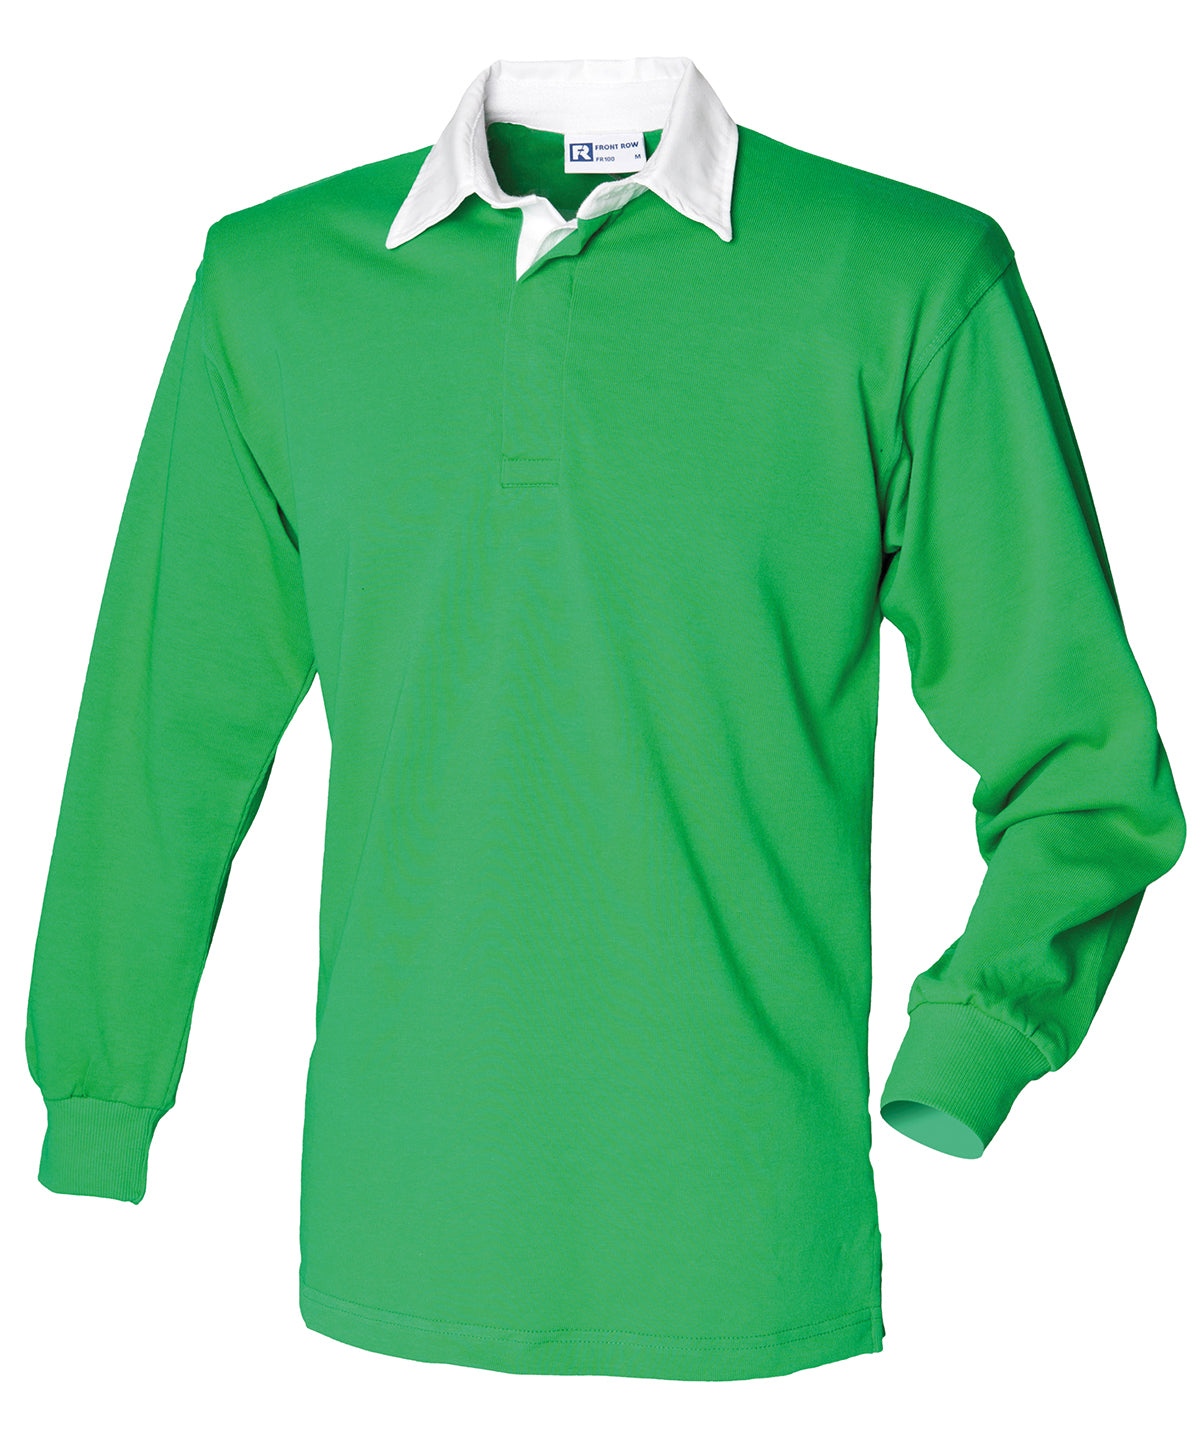 Personalised Polo Shirts - Mid Green Front Row Long sleeve plain rugby shirt